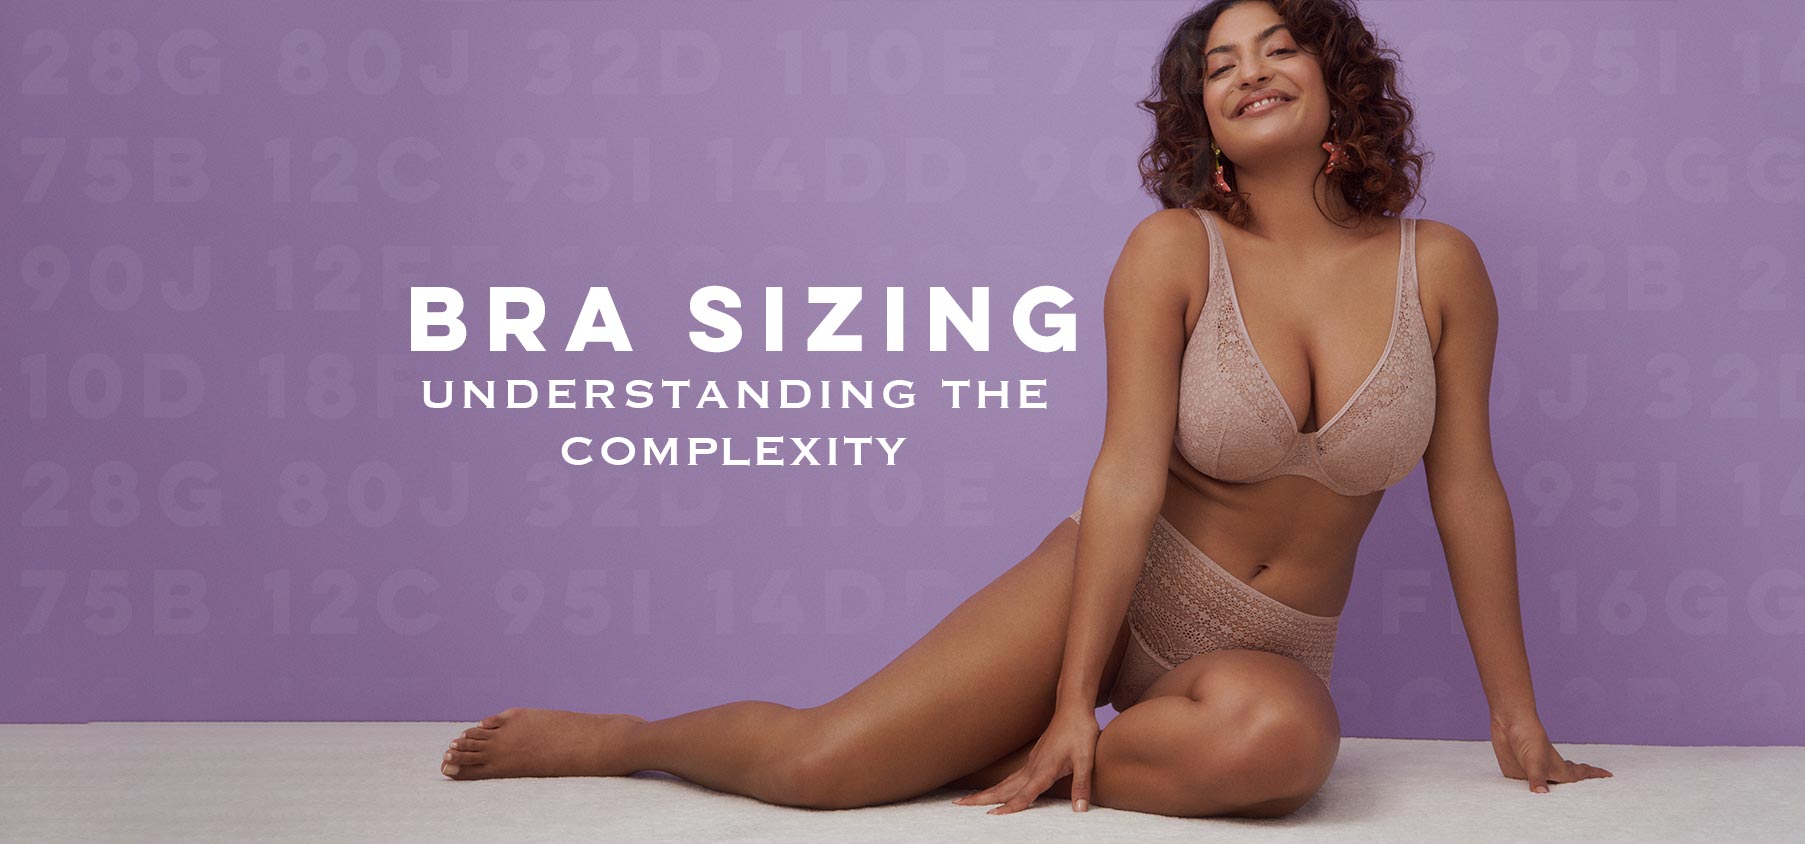 Wearing an ill-fitting bra isn't just uncomfortable, it's bad for